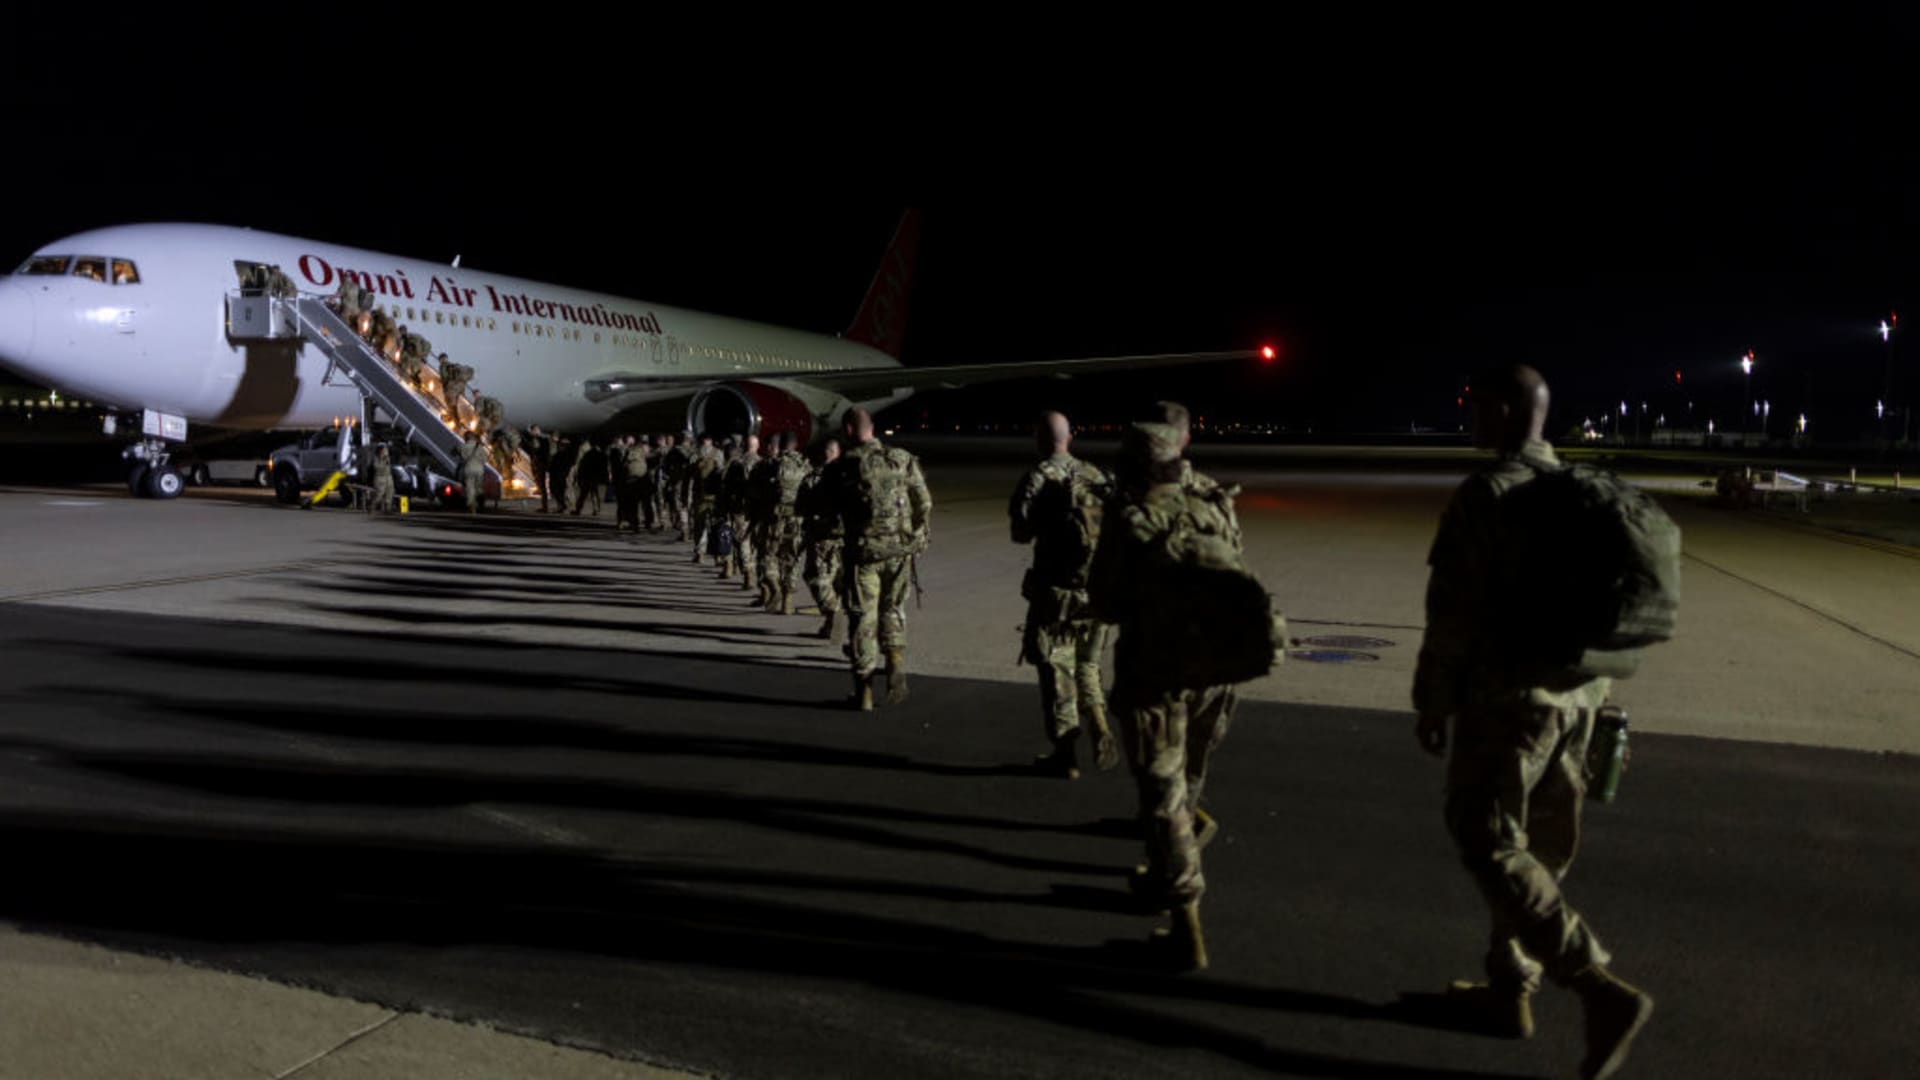 Members of the U.S. Army 2nd Brigade Combat Team depart for their deployment in Europe on July 7, 2022 in Fort Campbell, Kentucky. 